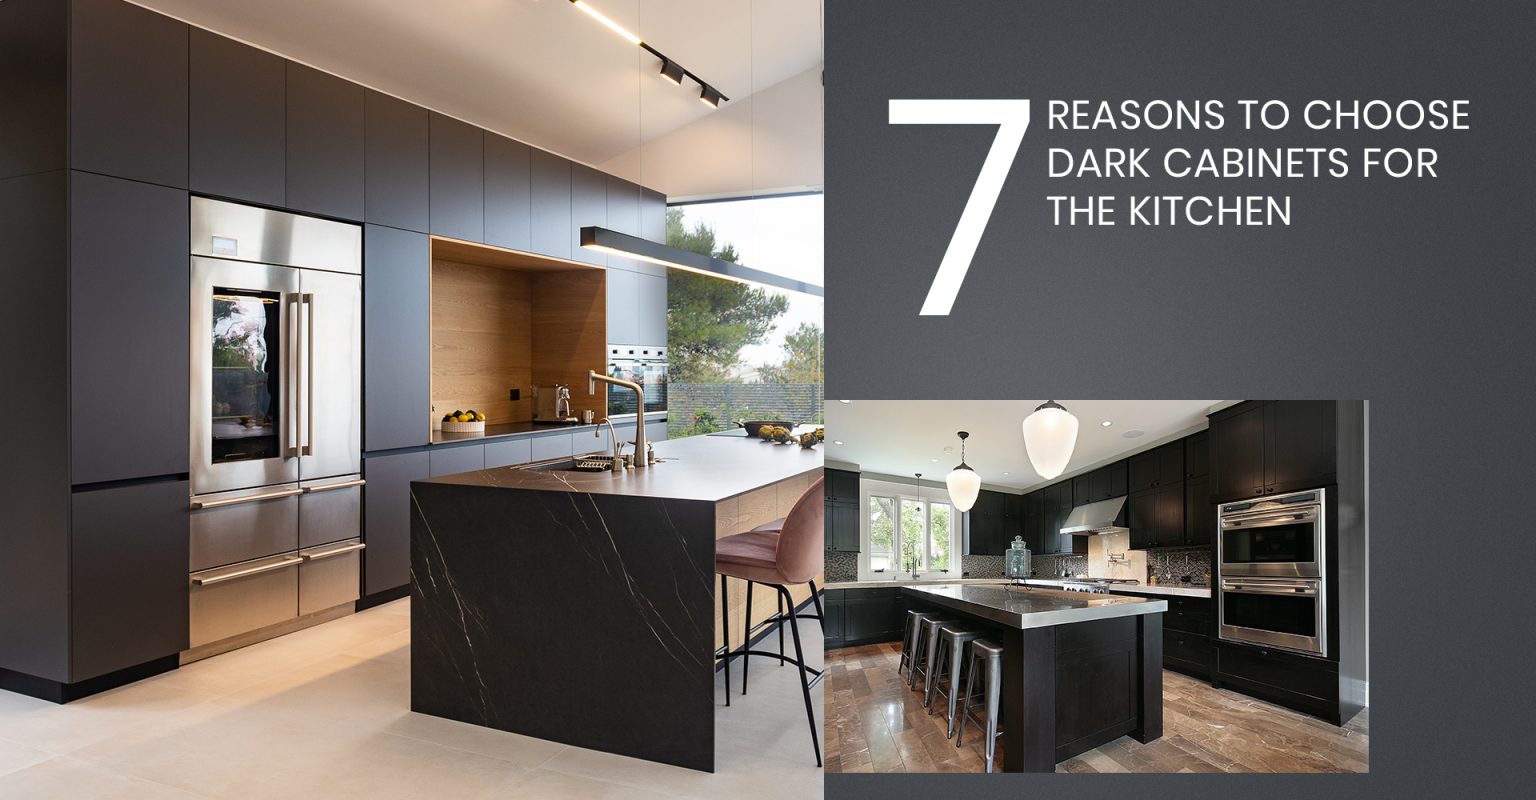 7 Reasons to Choose Dark Cabinets for The Kitchen | CabinetCorp